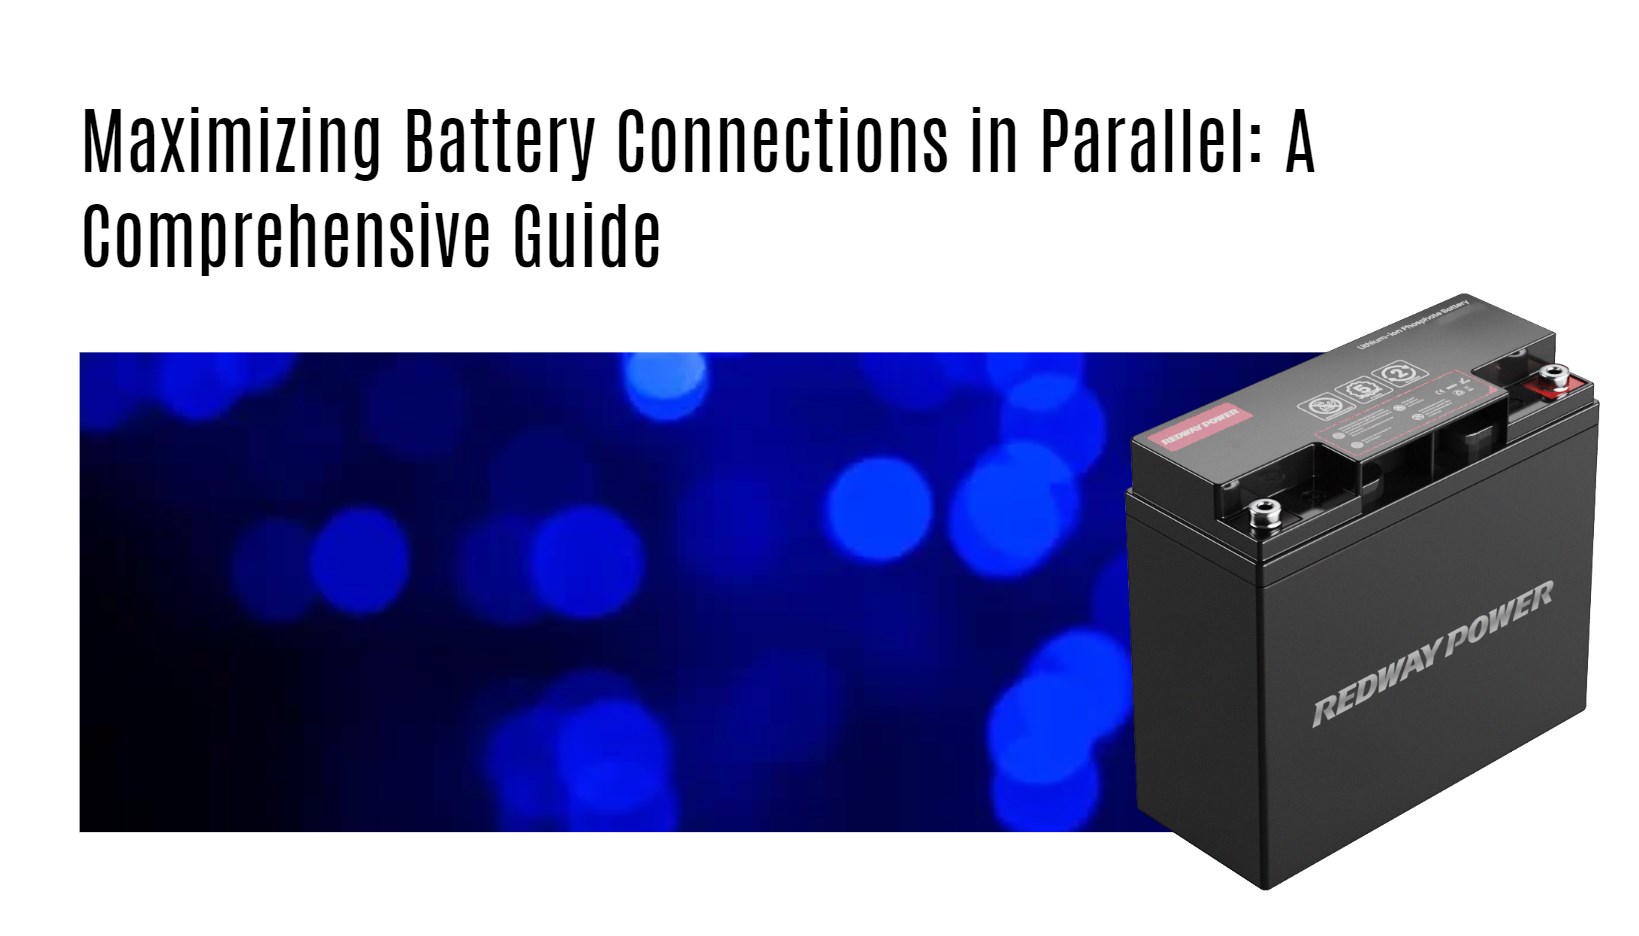 Maximizing Battery Connections in Parallel: A Comprehensive Guide